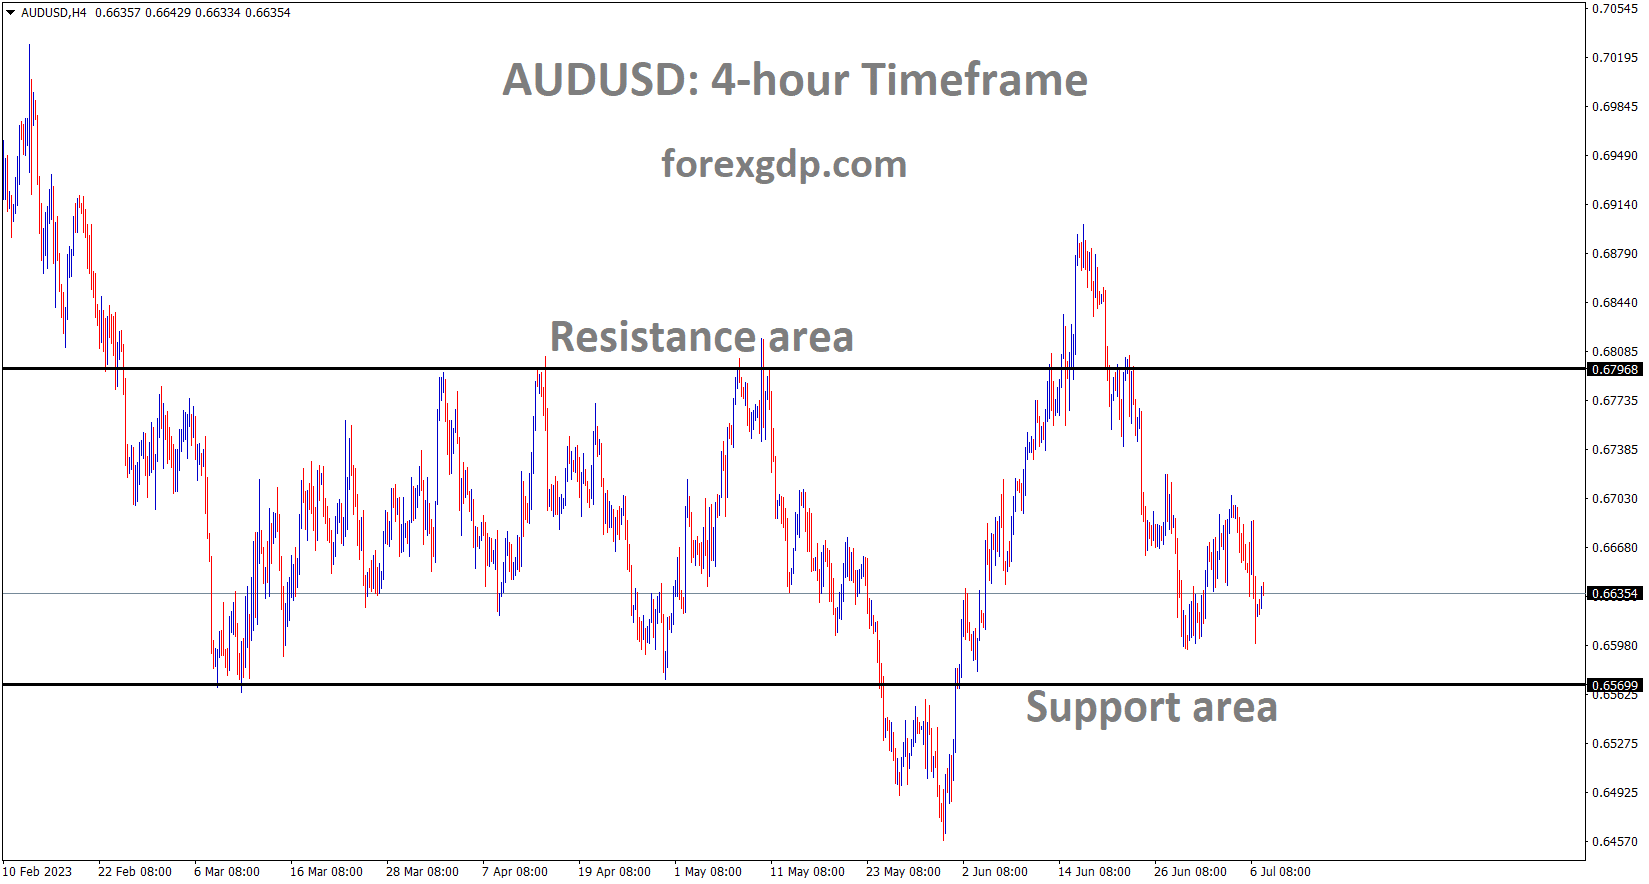 AUDUSD H4 TF analysis Market is moving in the box pattern and the market has reached the Horizontal support area of the pattern